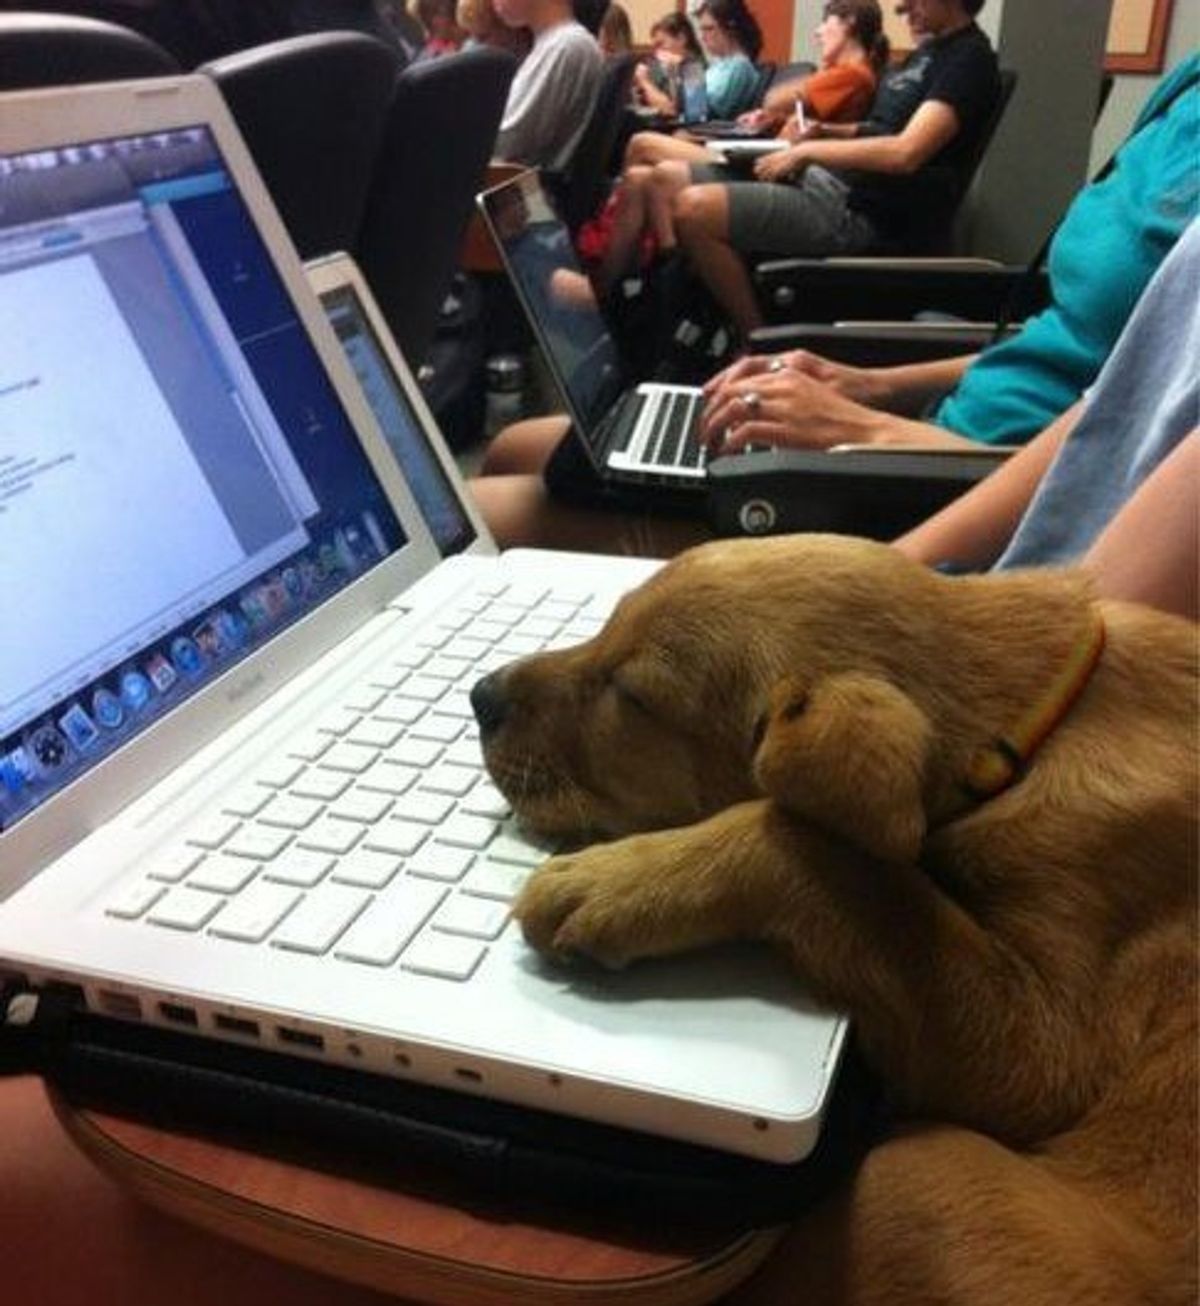 A Day in College Portrayed by Animals